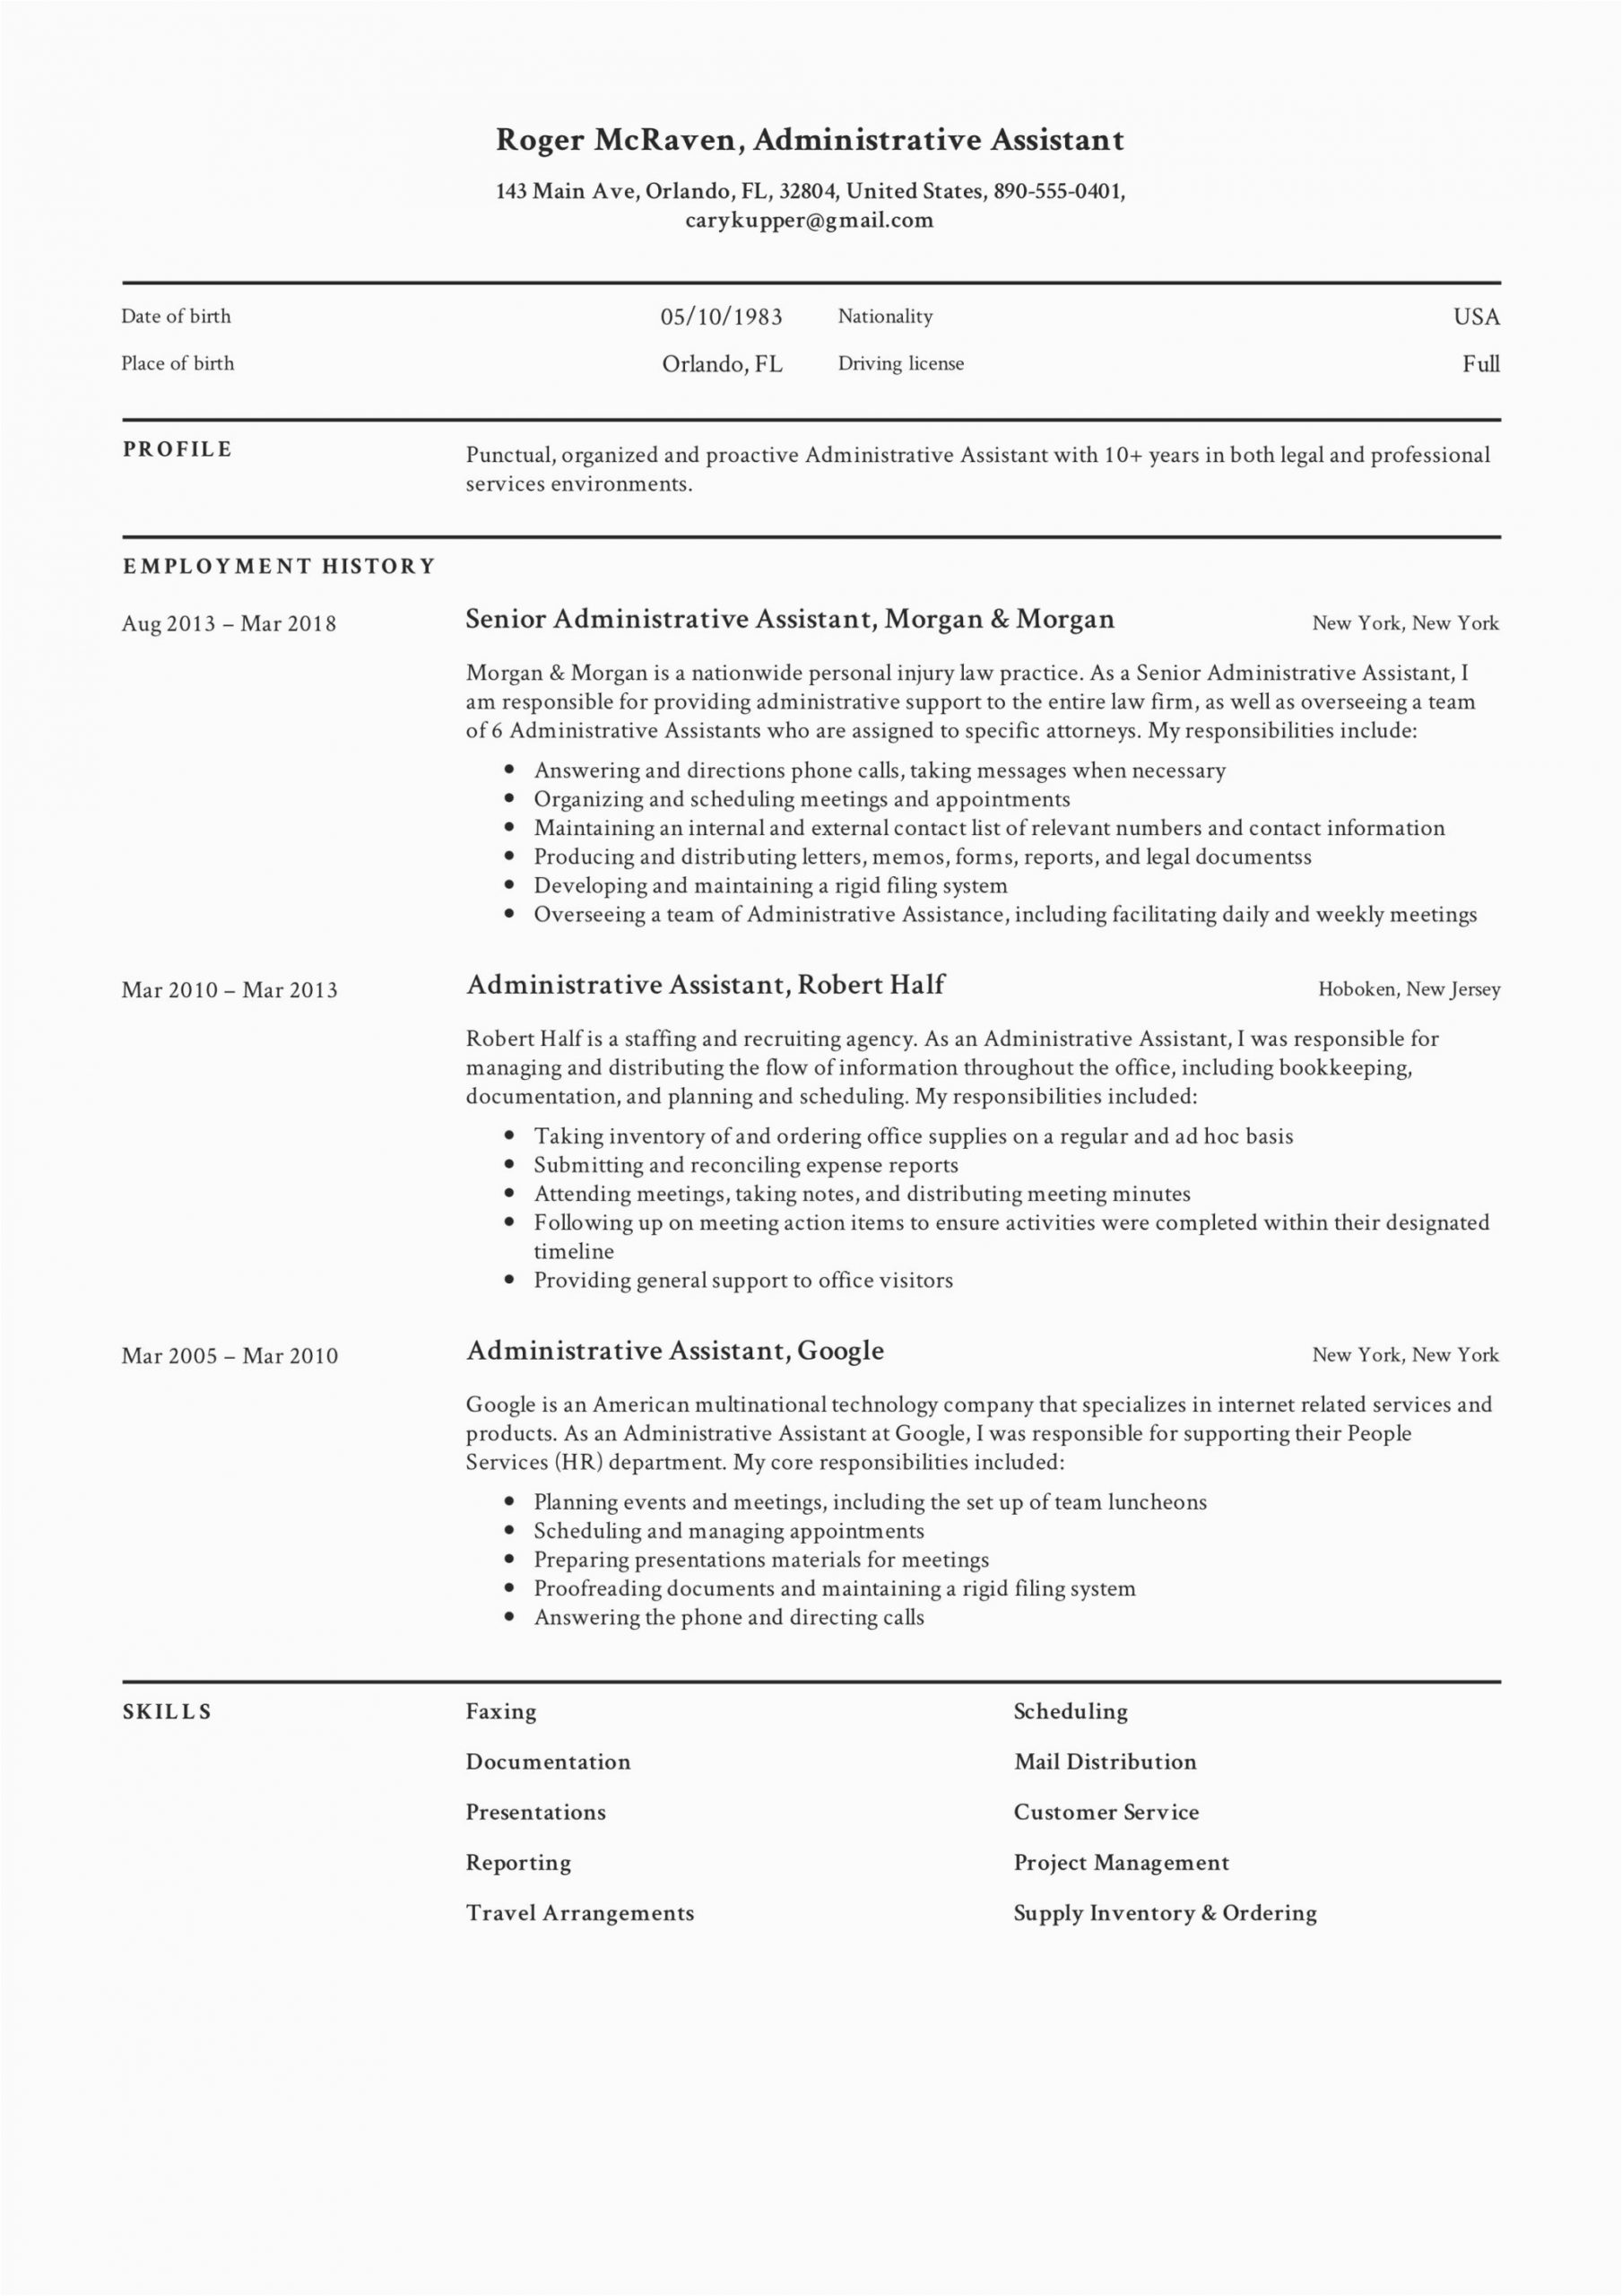 Sample Resume Templates for Administrative assistant Full Guide Administrative assistant Resume [ 12 Samples